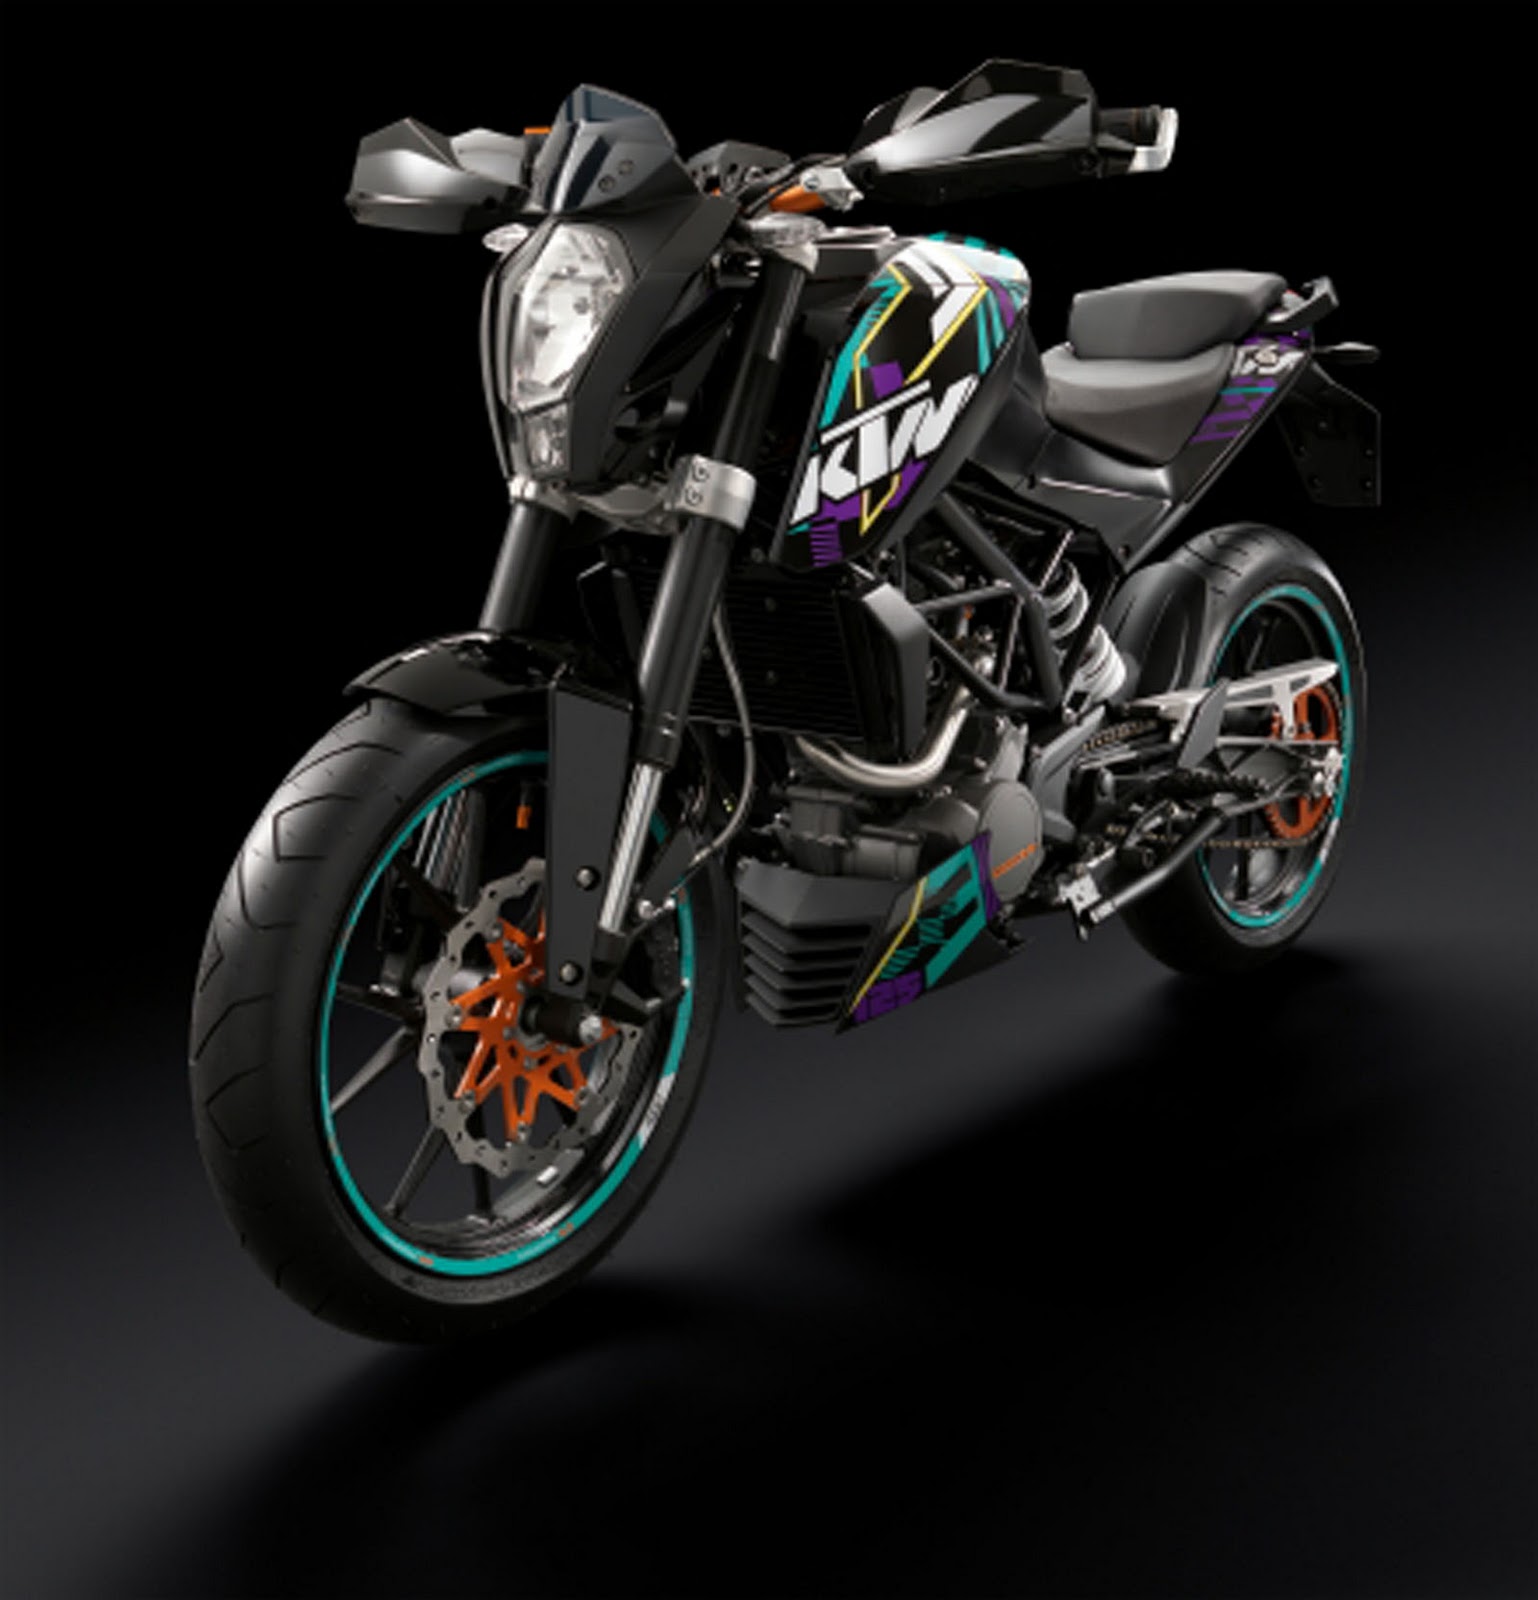 New Motorcycle, Custom & modification, Review and Specs: New KTM 125 Duke